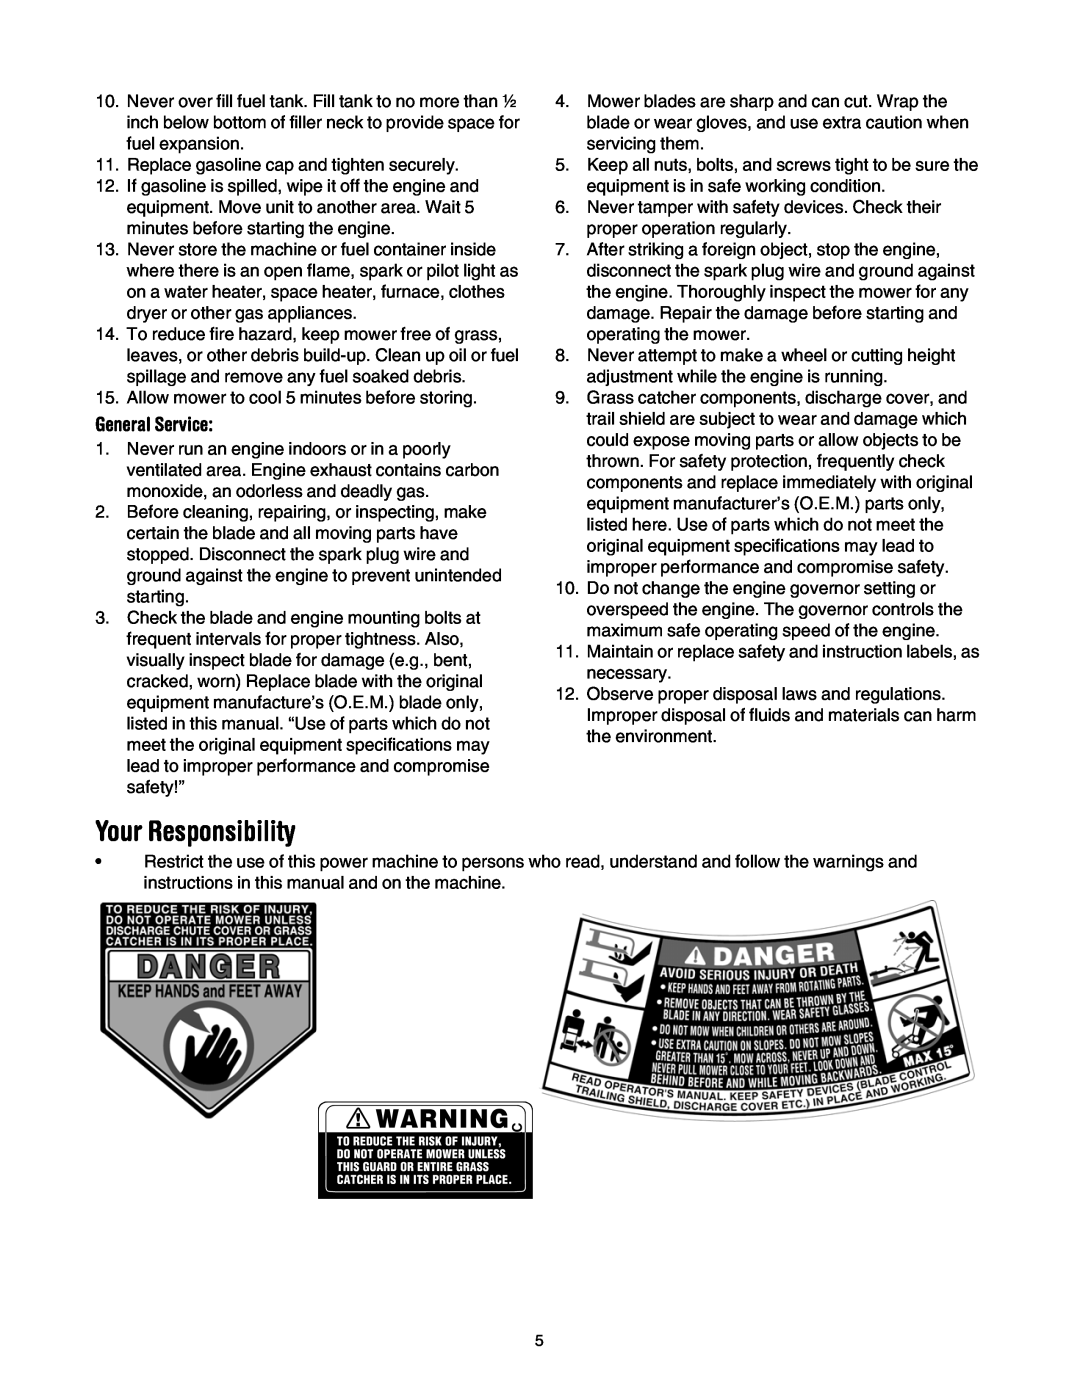 Troy-Bilt 549, 546 manual Your Responsibility, General Service 